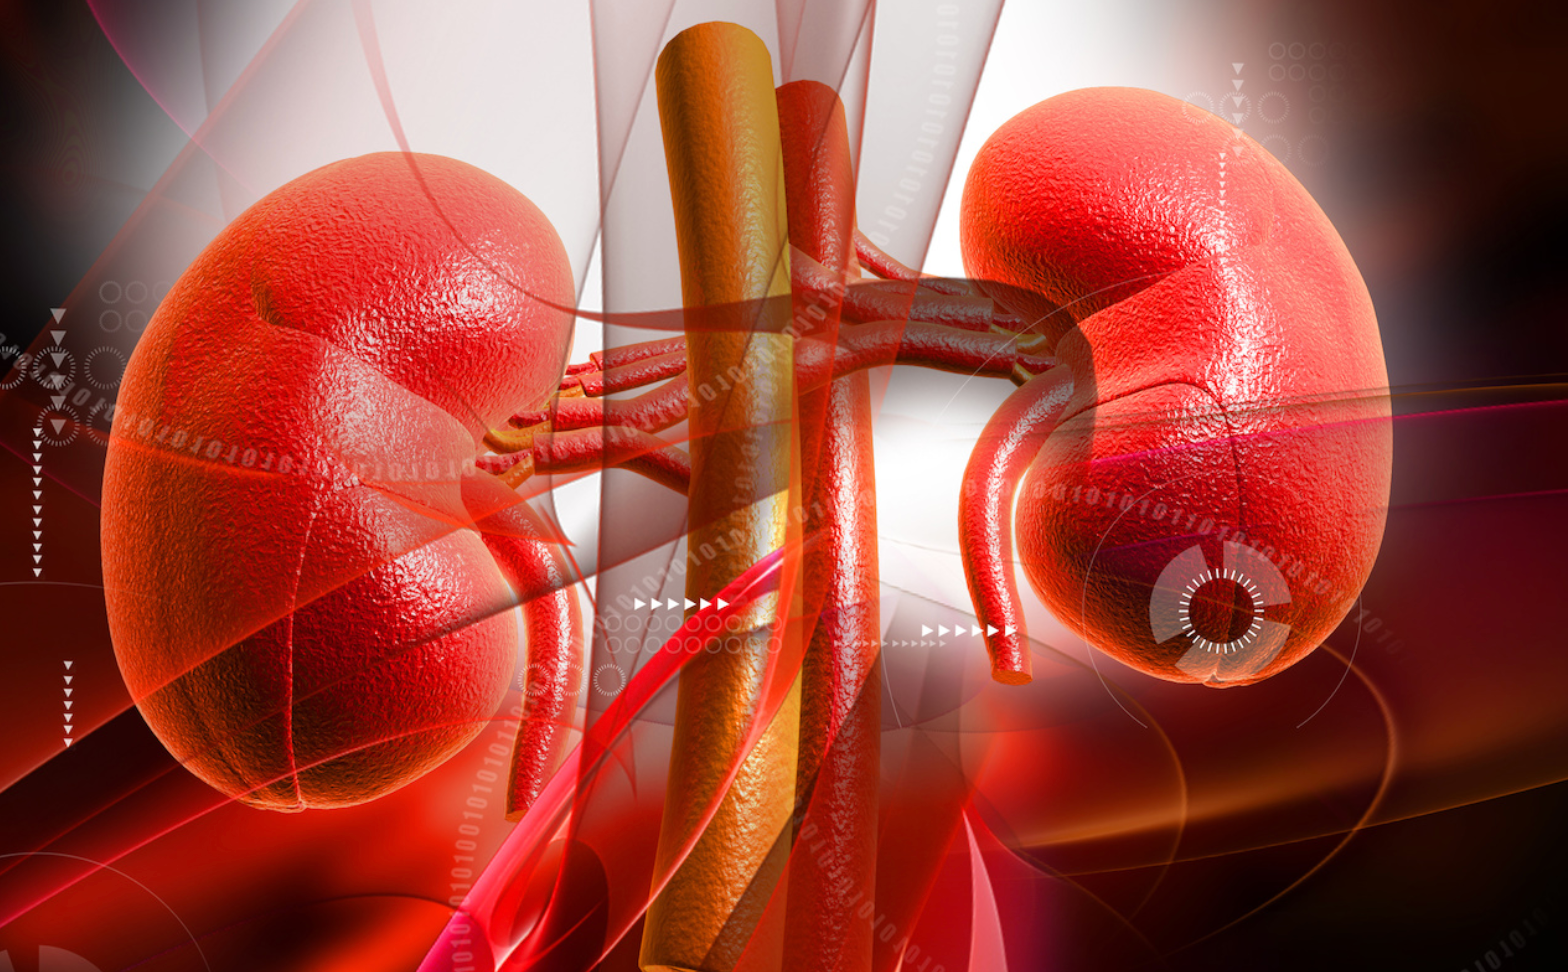 Research May Improve Targeted Treatments for Kidney-related Diseases